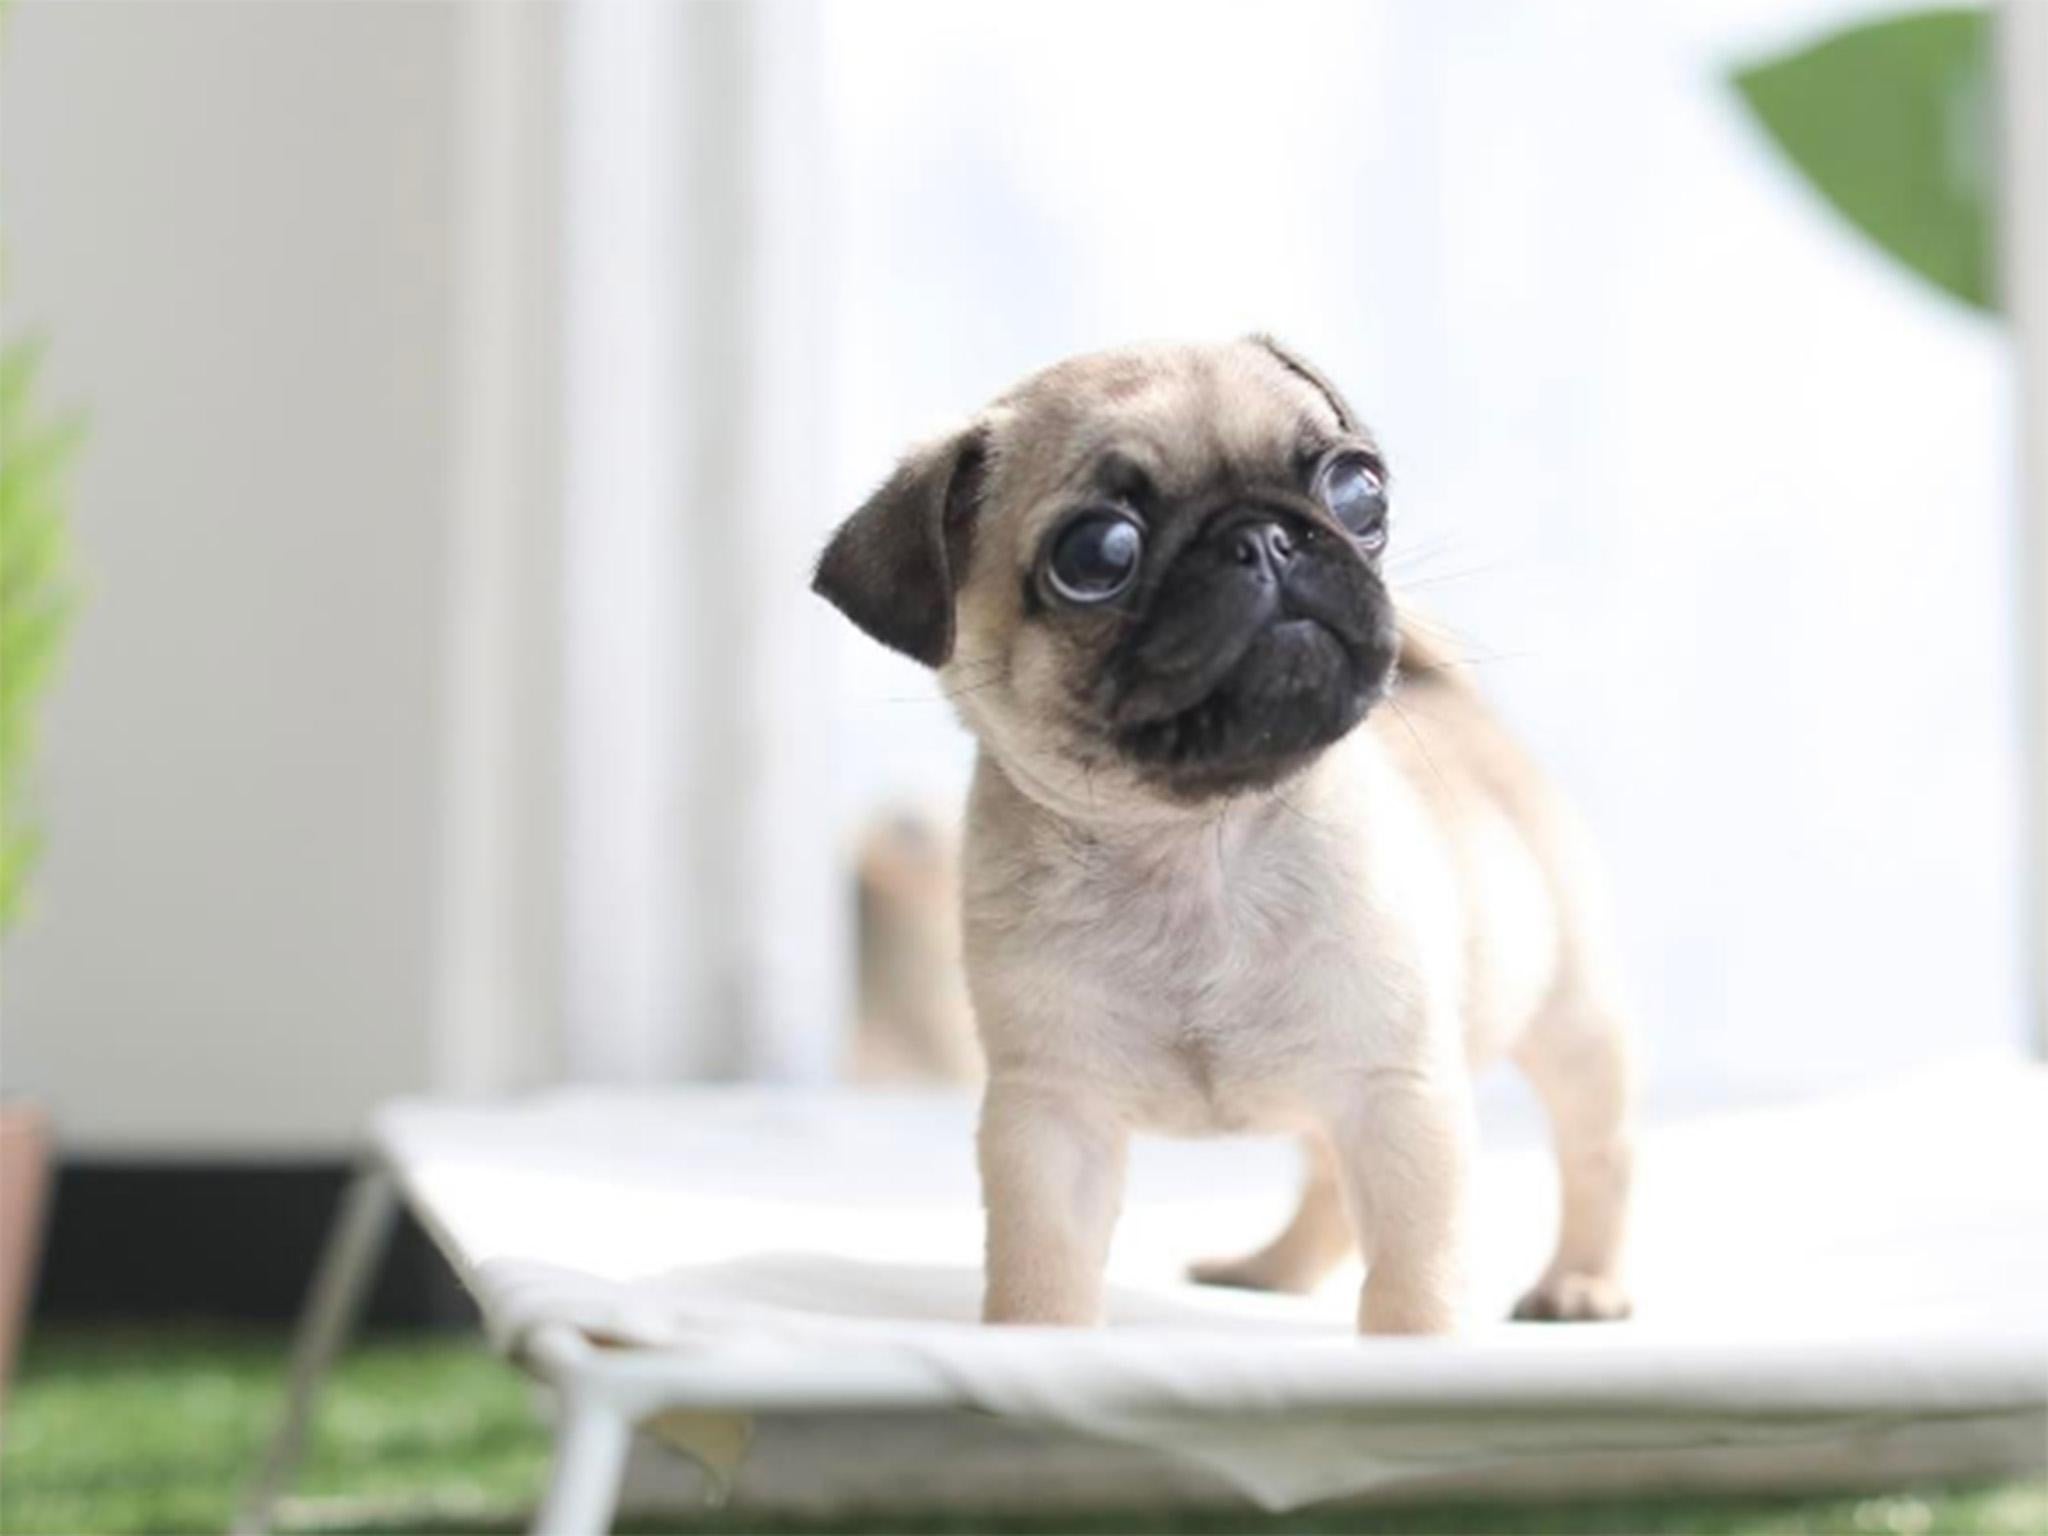 Dog Welfare Groups Warn Teacup Puppy Craze Is Harmful To Pets | The  Independent | The Independent